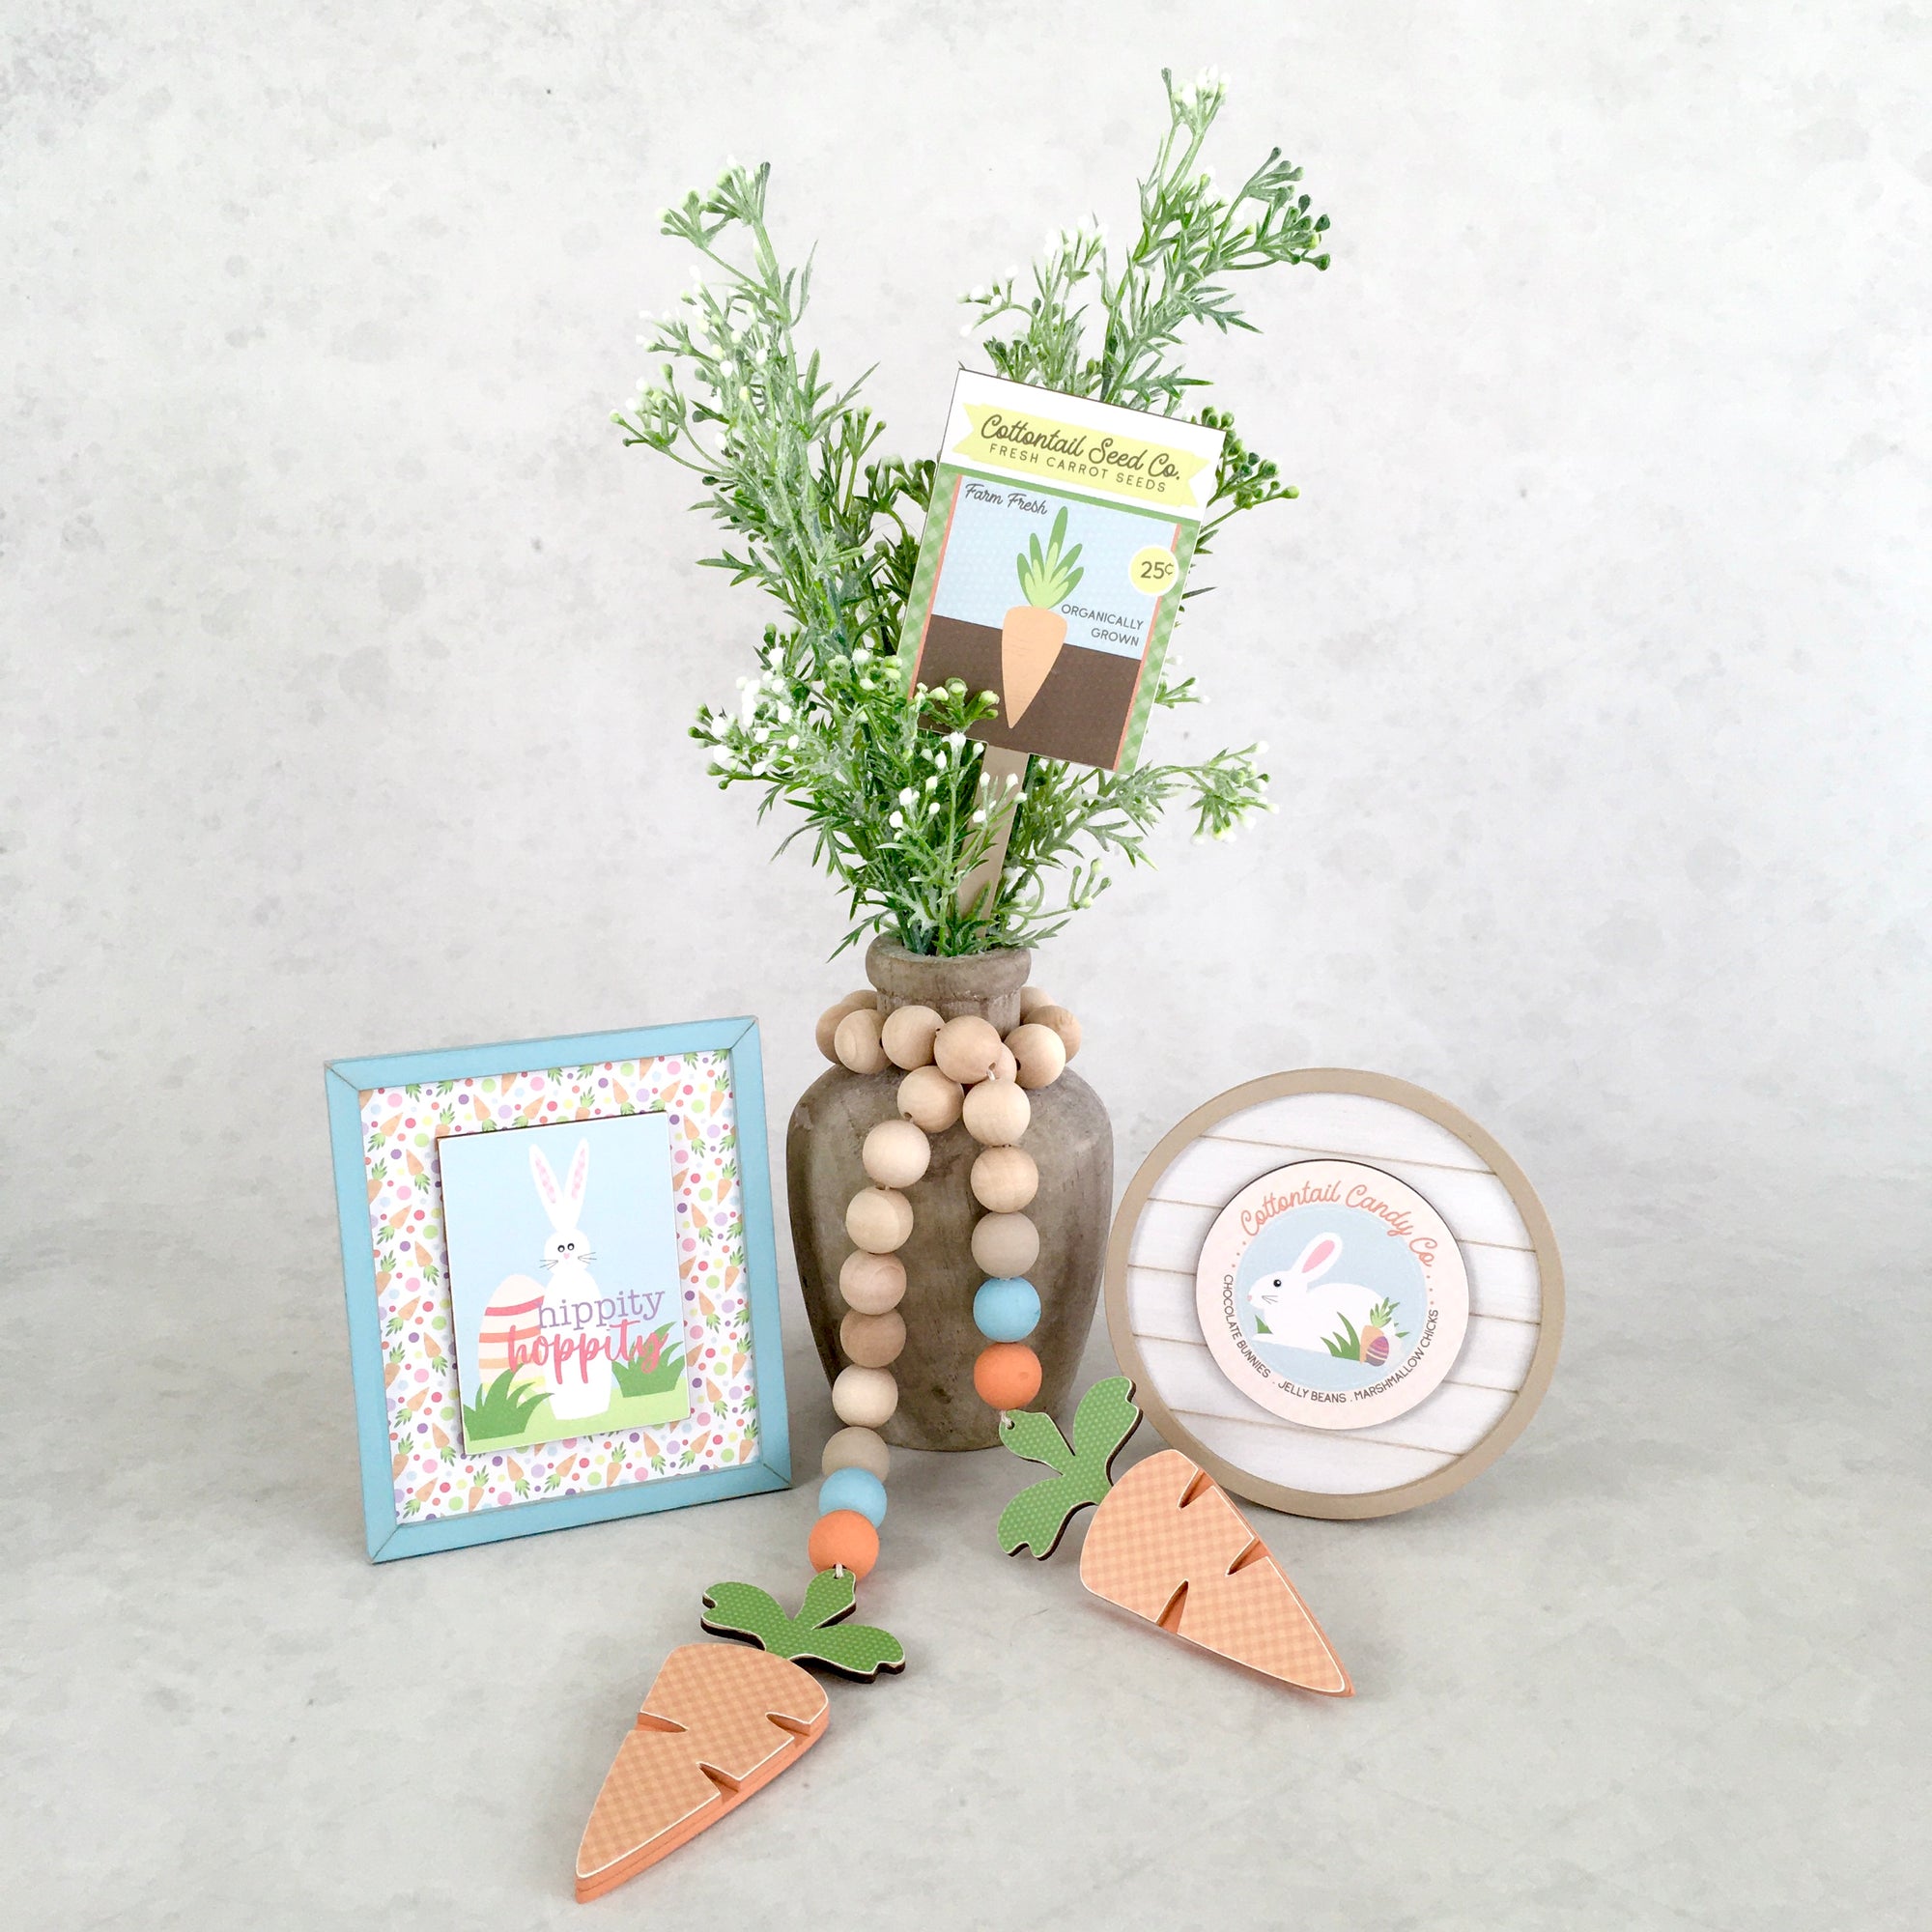 Easter tiered tray signs, easter beaded garland, shiplap signs, carrot garland with beads, seed packet plant stick, easter tiered tray decor, small wood signs for tiered trays. Easter tiered tray ideas.